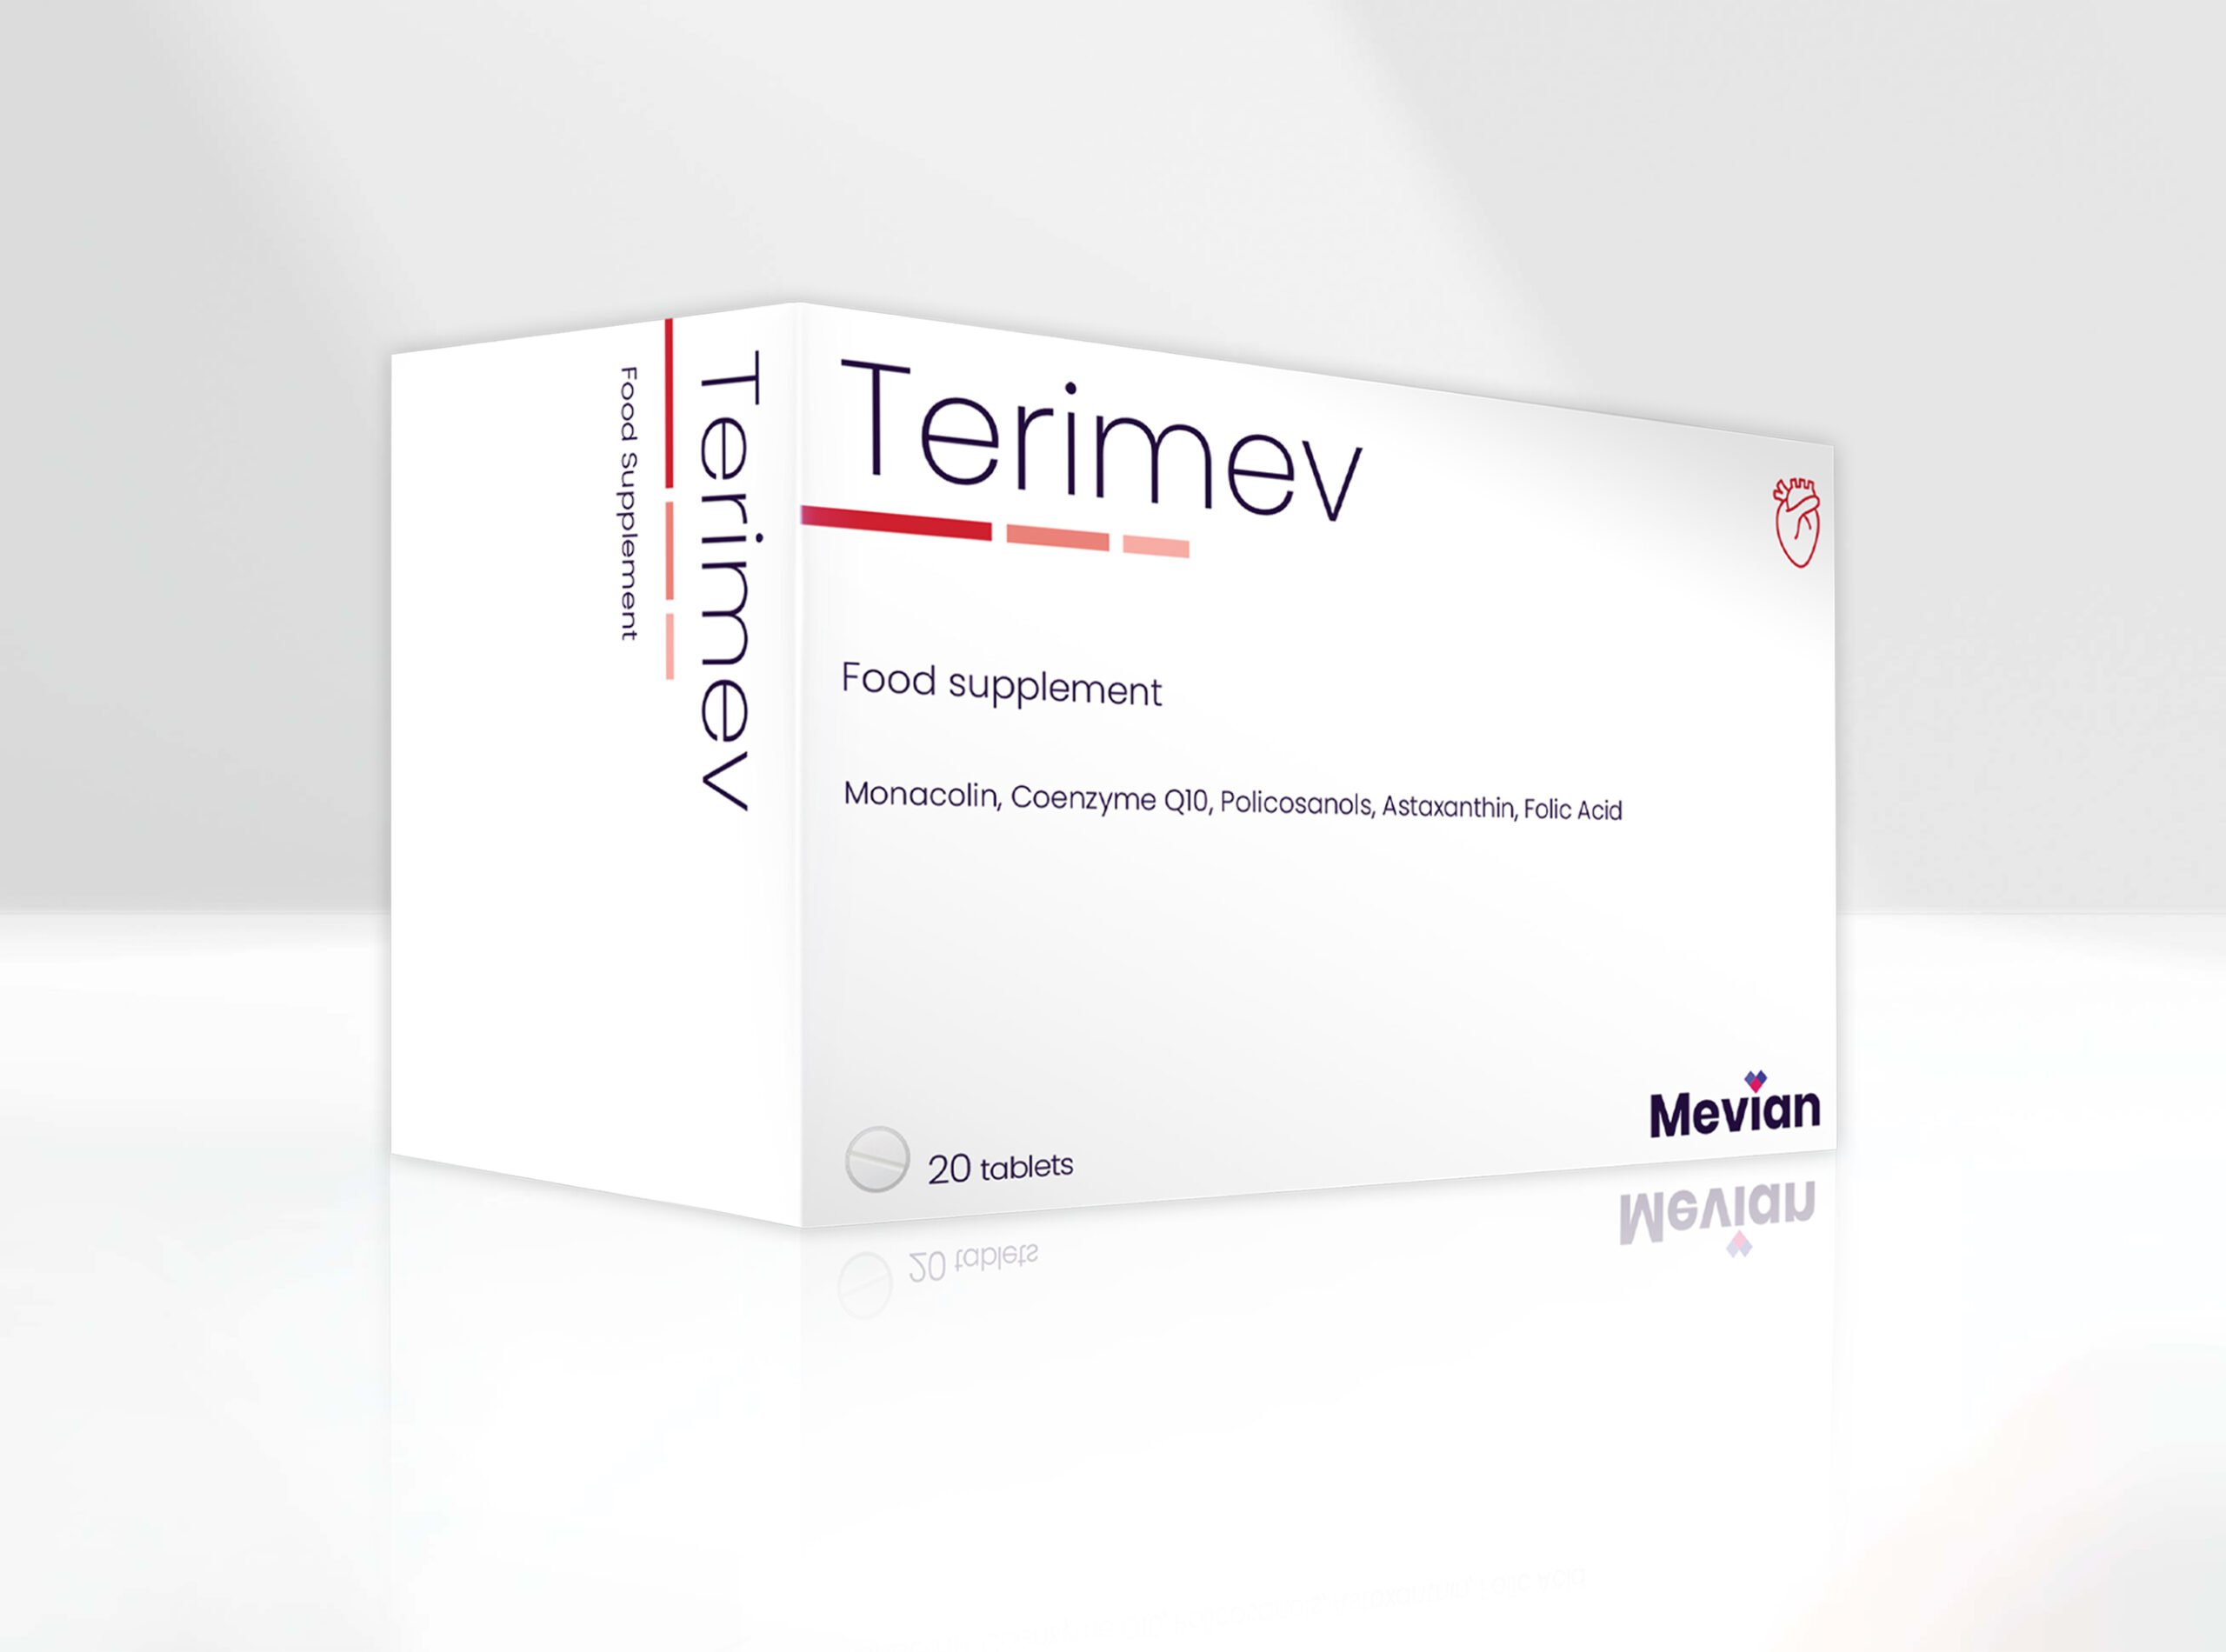 Terimev is ideal for addressing Hypercholesterolemia with high monacolin levels in a single dose.